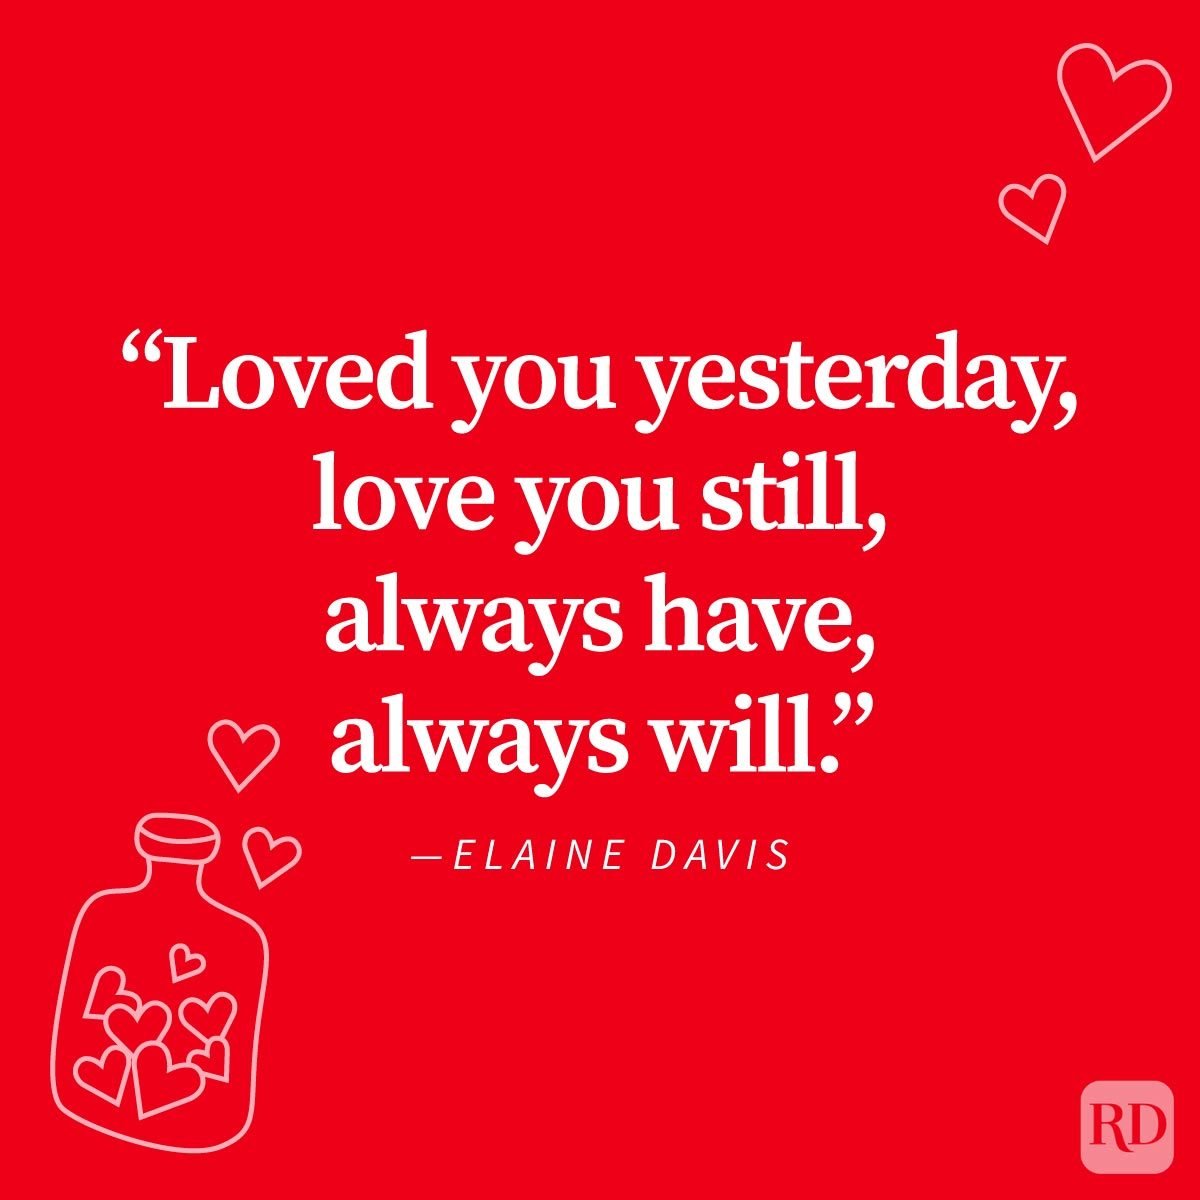 128 Best Love Quotes: Romantic, Sweet and Lovely Sayings